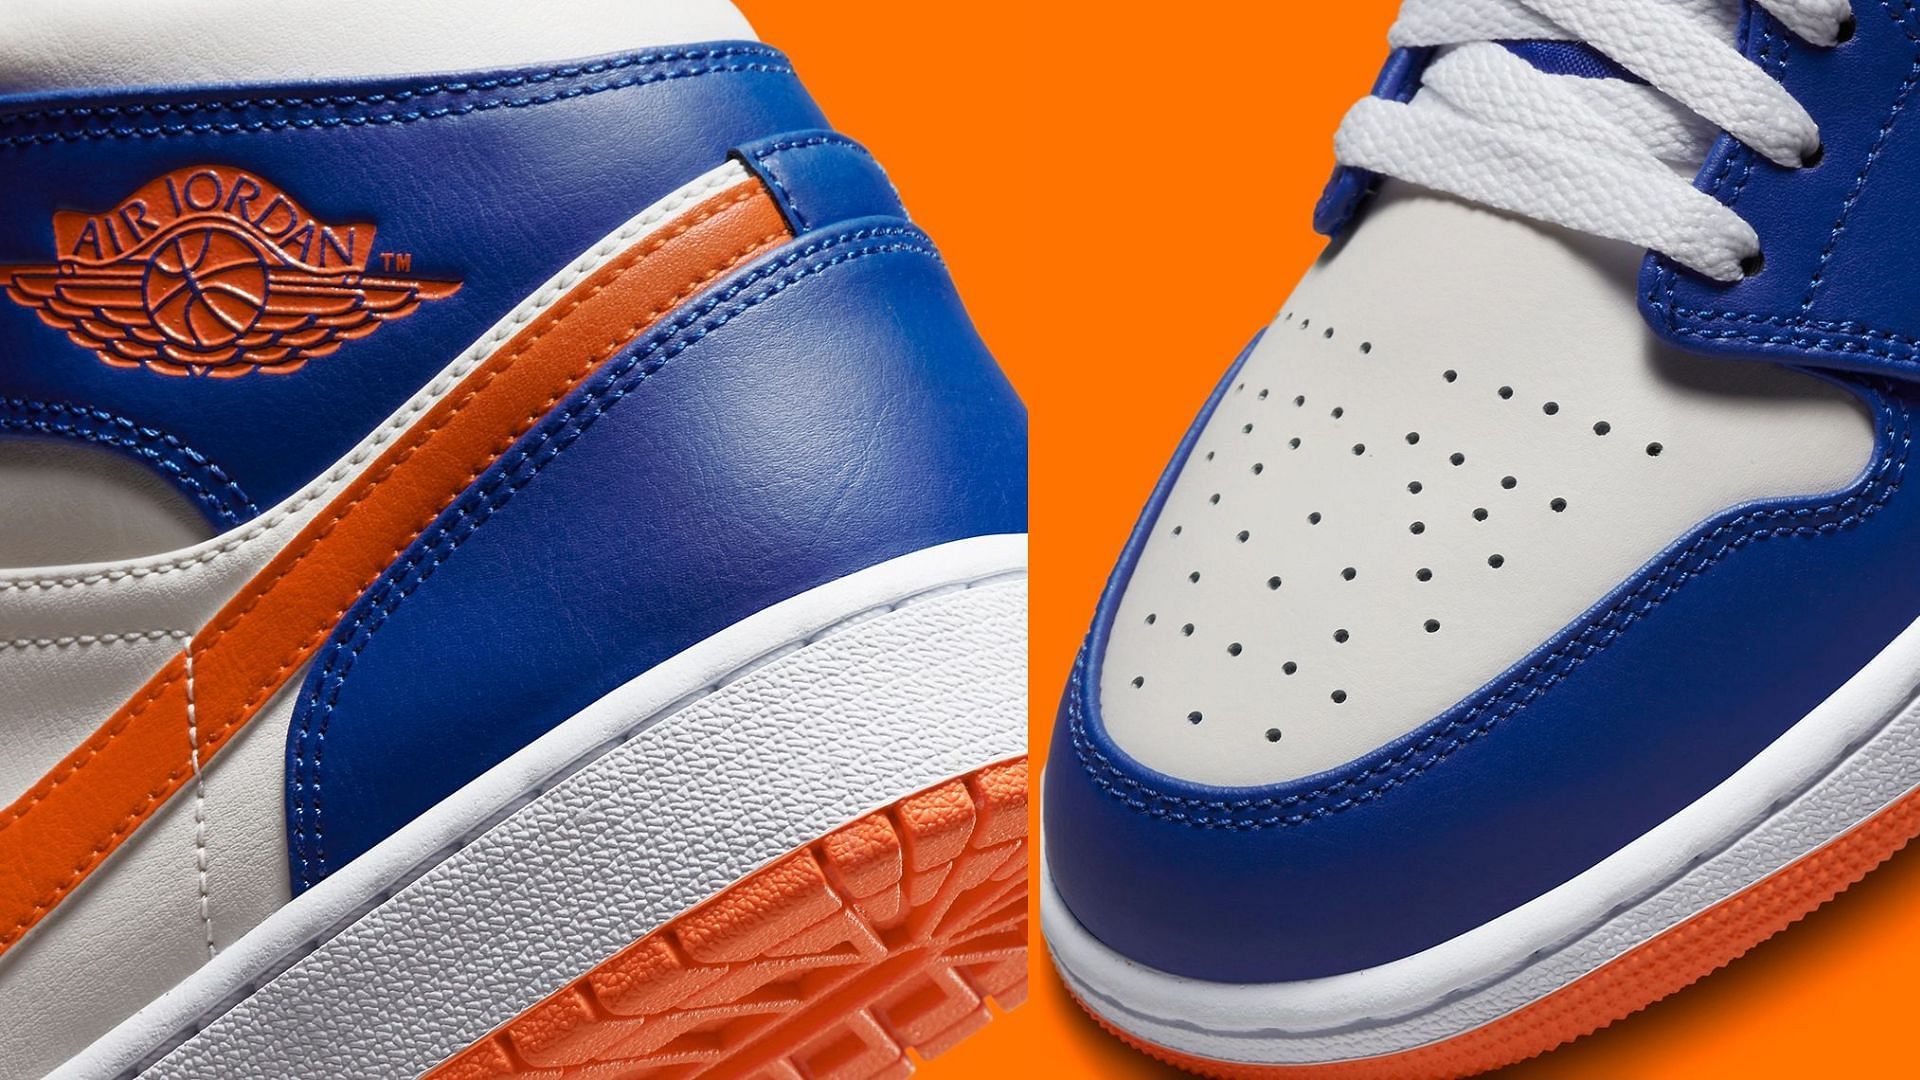 Take a closer look at the heels and toe boxes of the impending sneakers (Image via Nike)